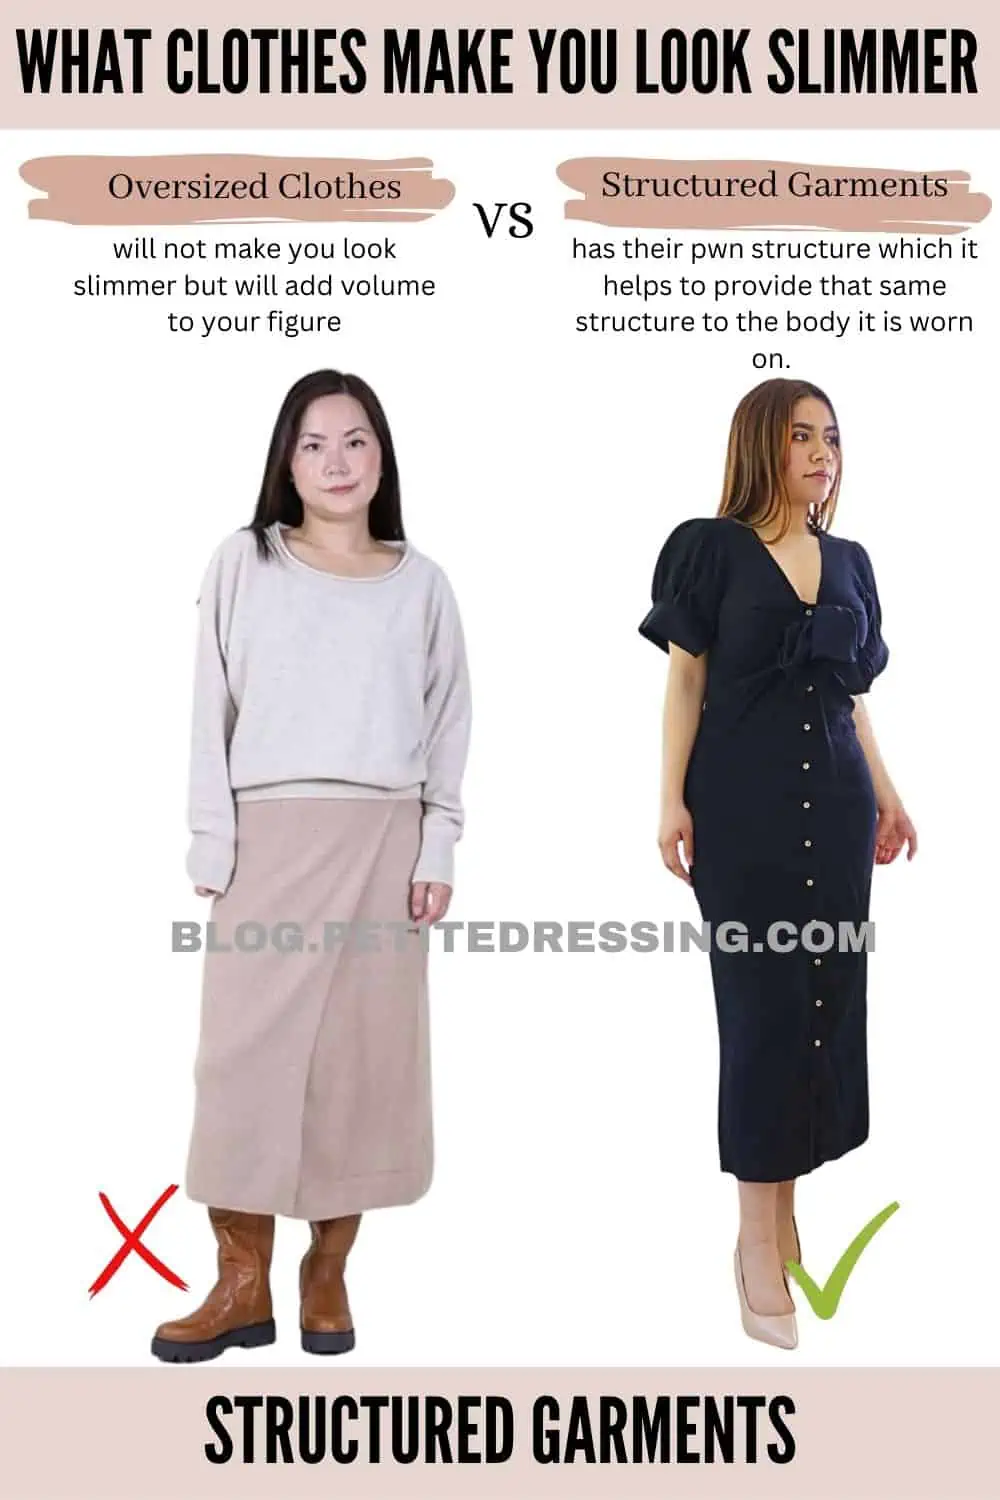 HOW TO LOOK SLIMMER IN A DRESS